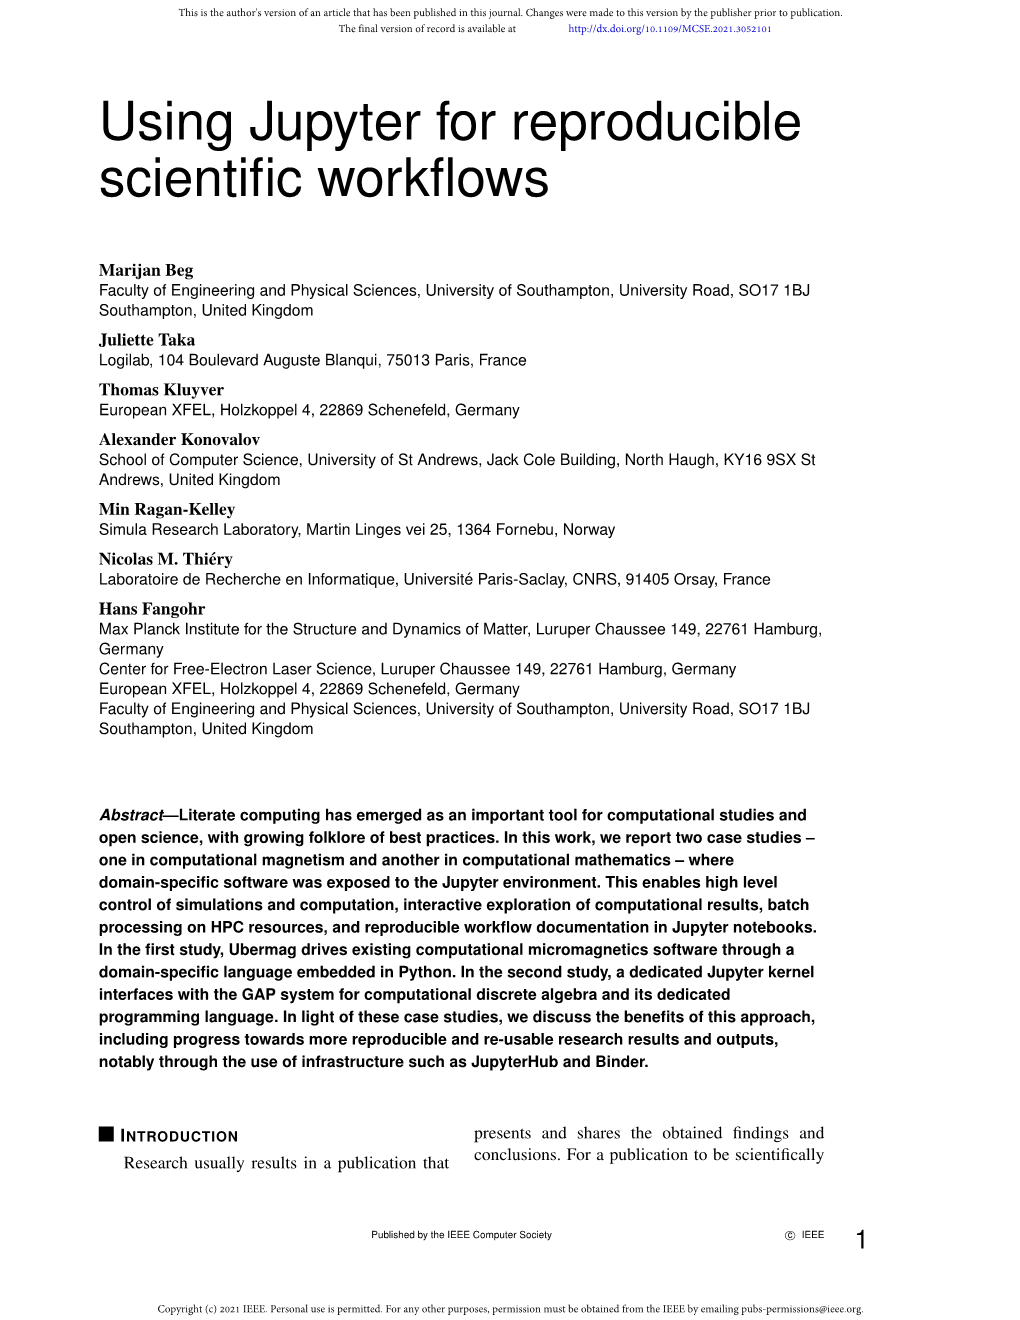 Using Jupyter for Reproducible Scientific Workflows